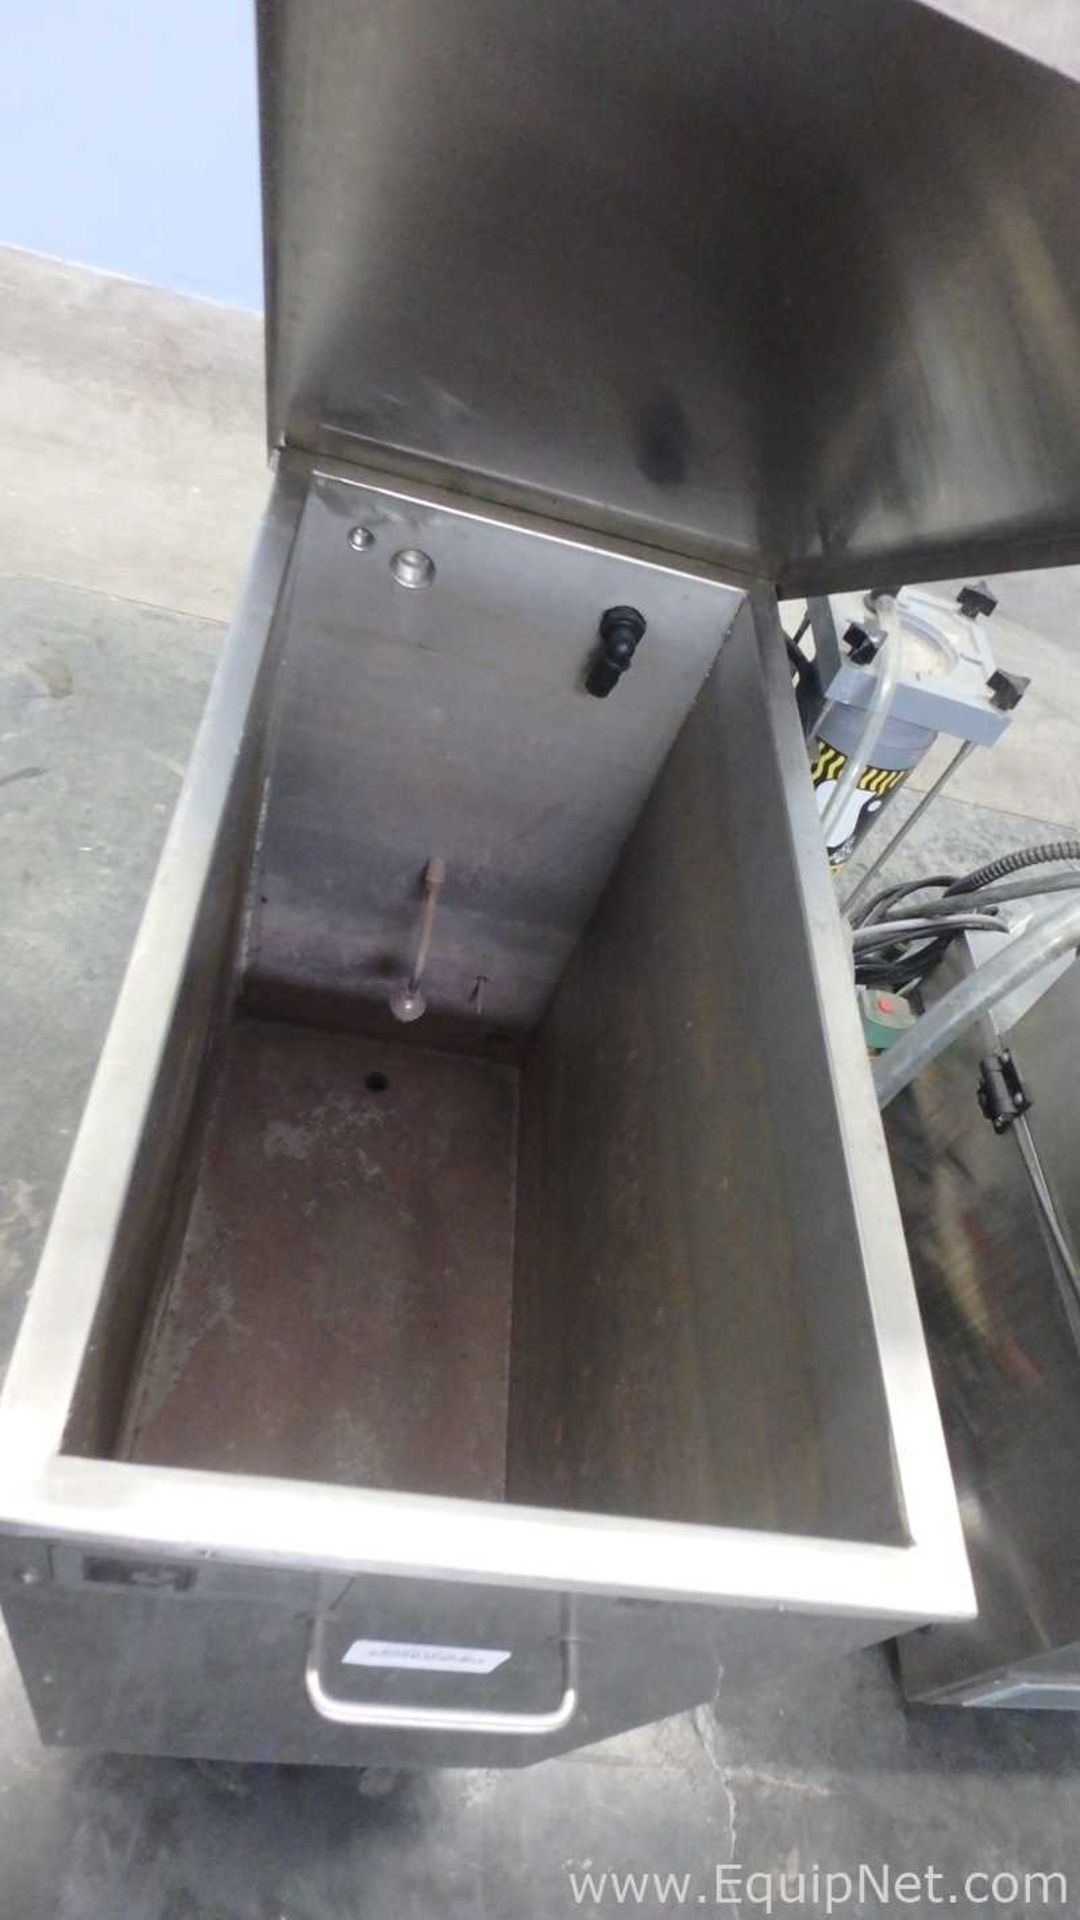 ESMA Inc. E700 Ultrasonic Cleaning System with E997 30Gal Heated Storage Tank - Image 27 of 38